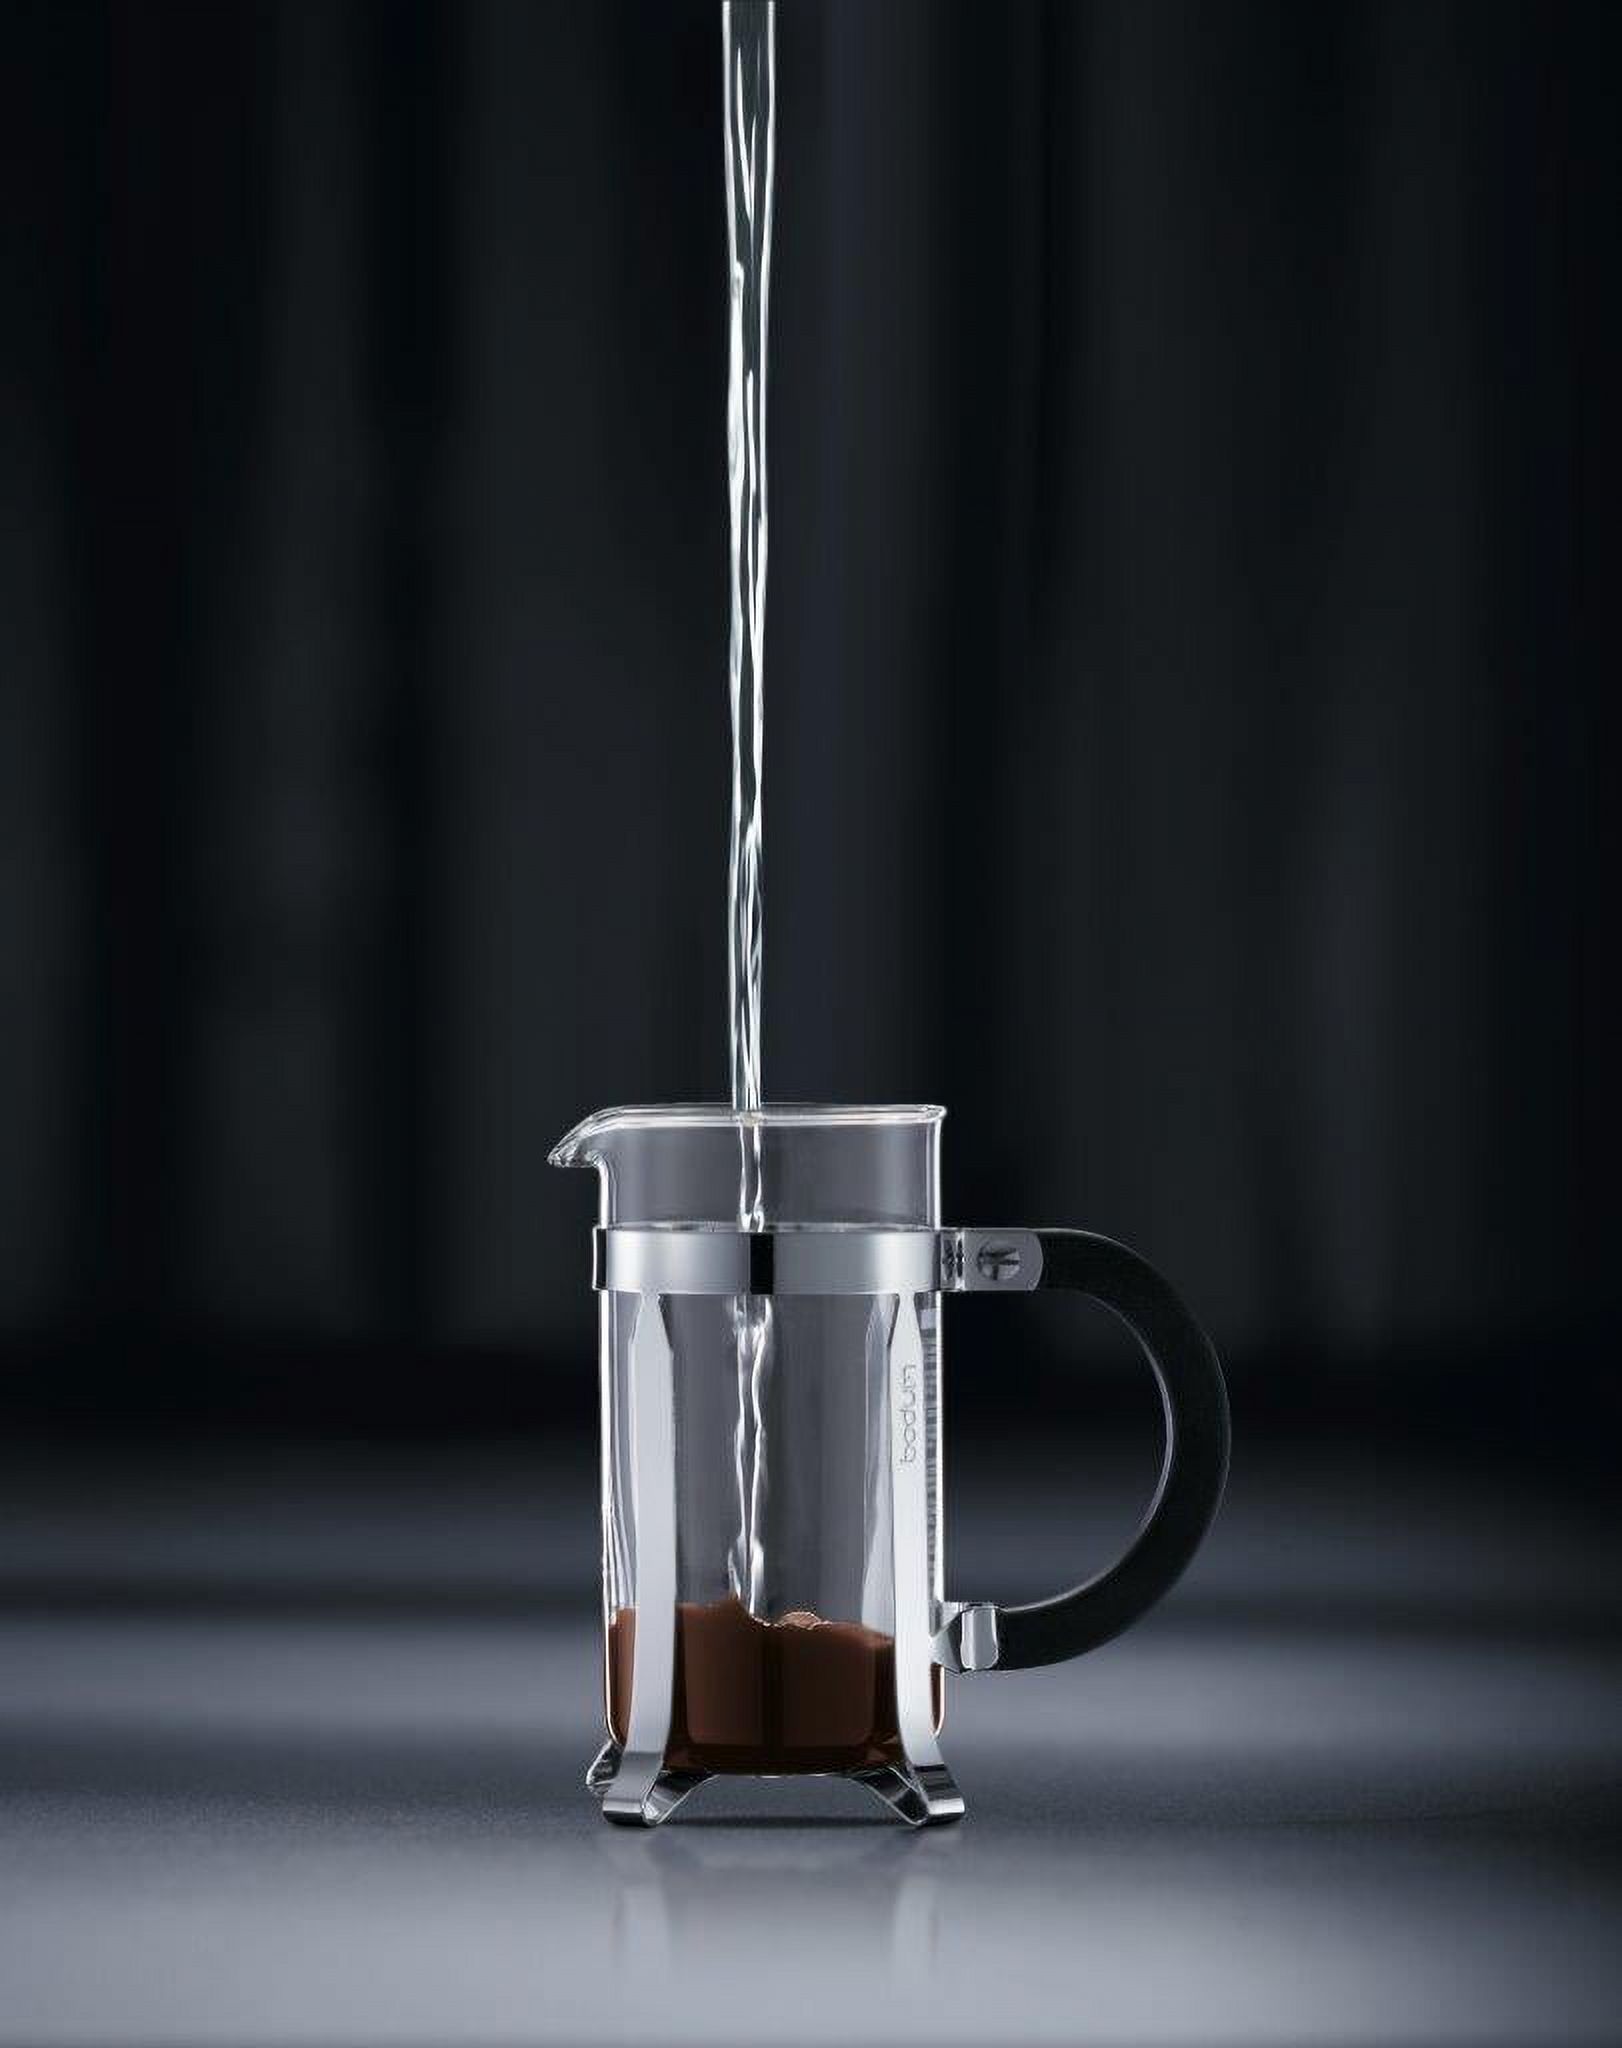 BODUM Chambord French Press Coffee Maker, 12 Ounce, Stainless Steel - image 6 of 7